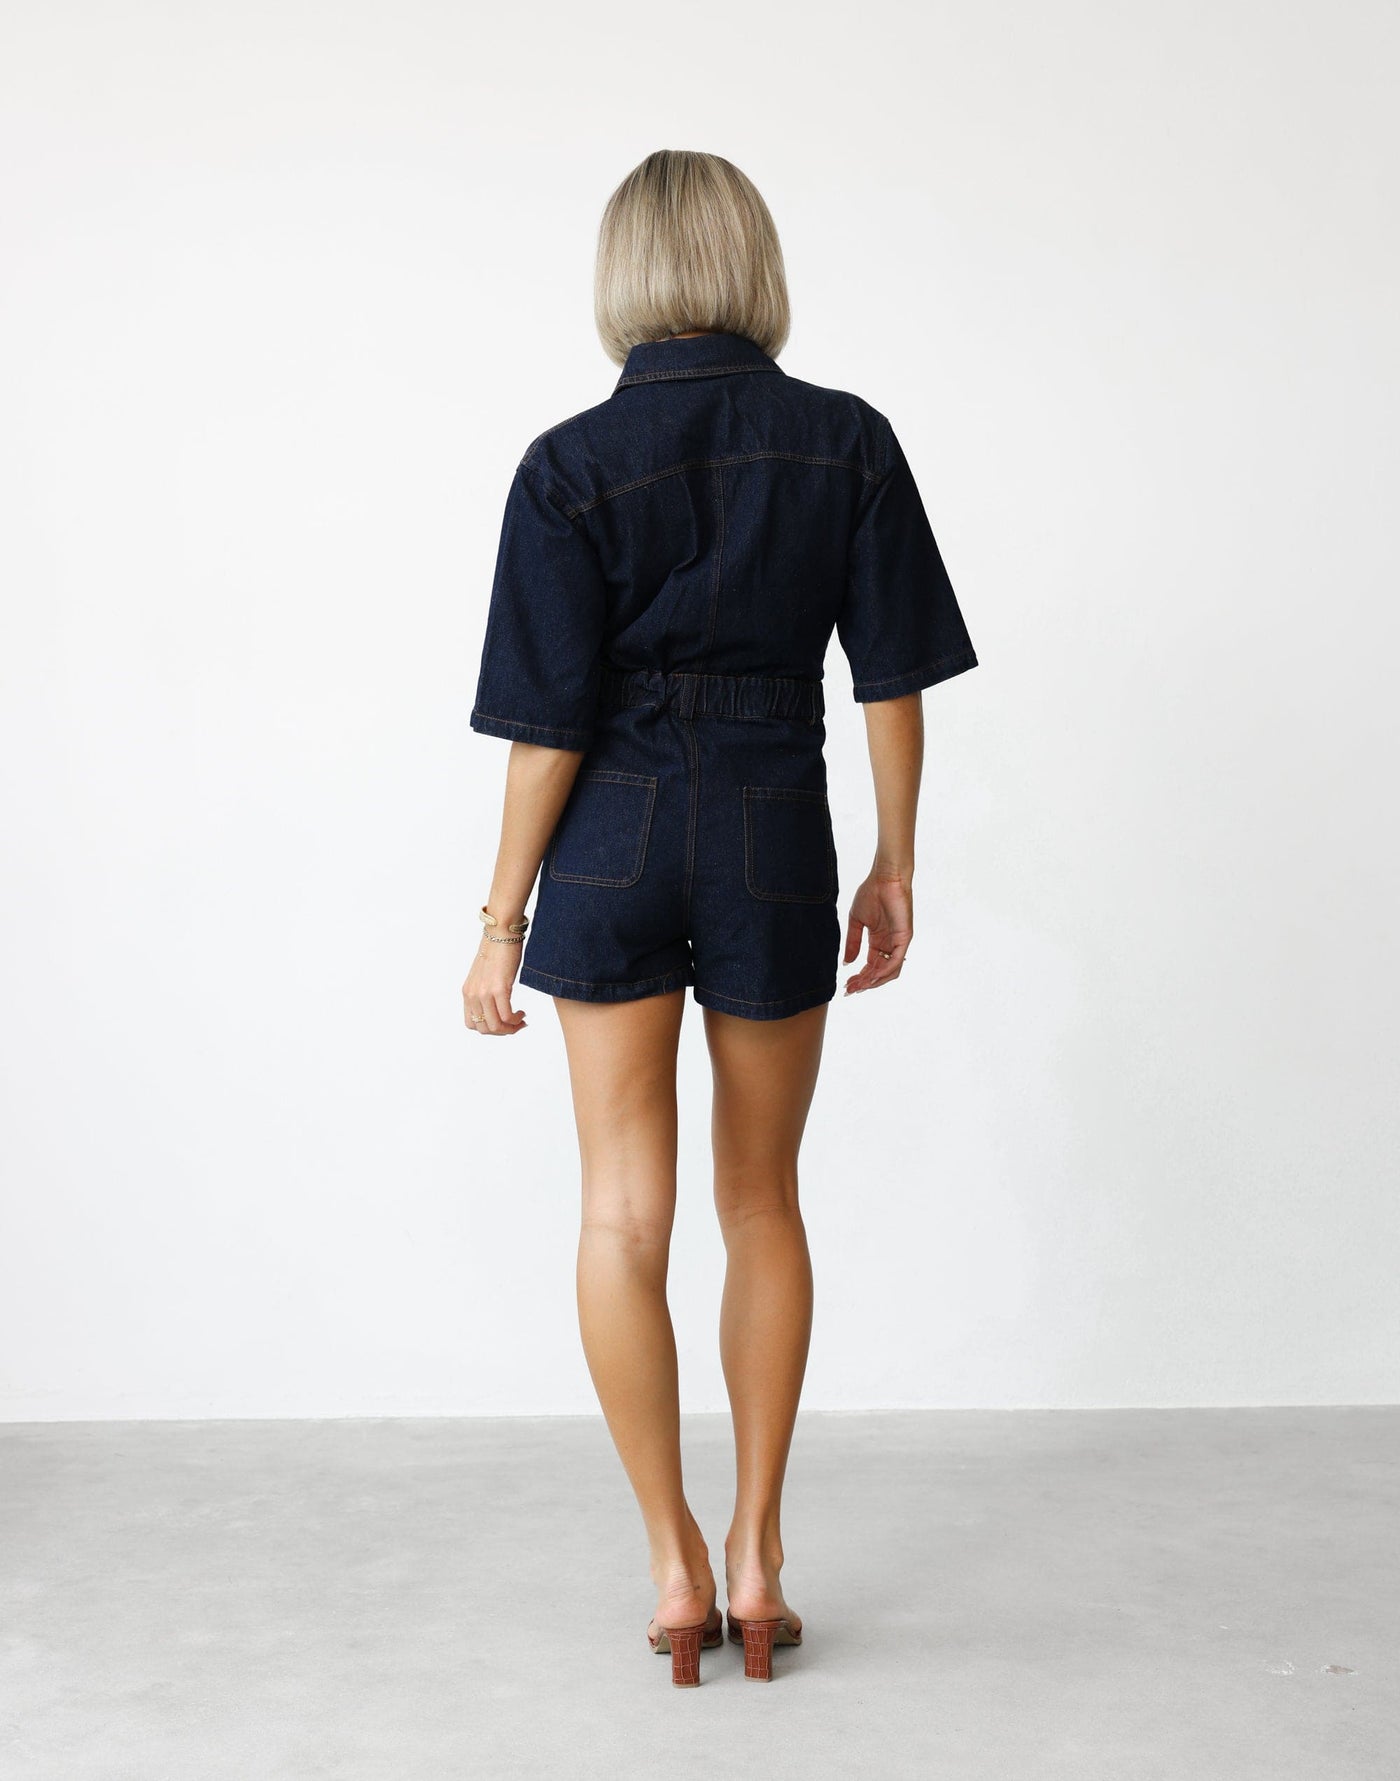 Darcy Playsuit (Dark Denim) - Button Closure Playsuit with Belt Loops - Women's Playsuit - Charcoal Clothing